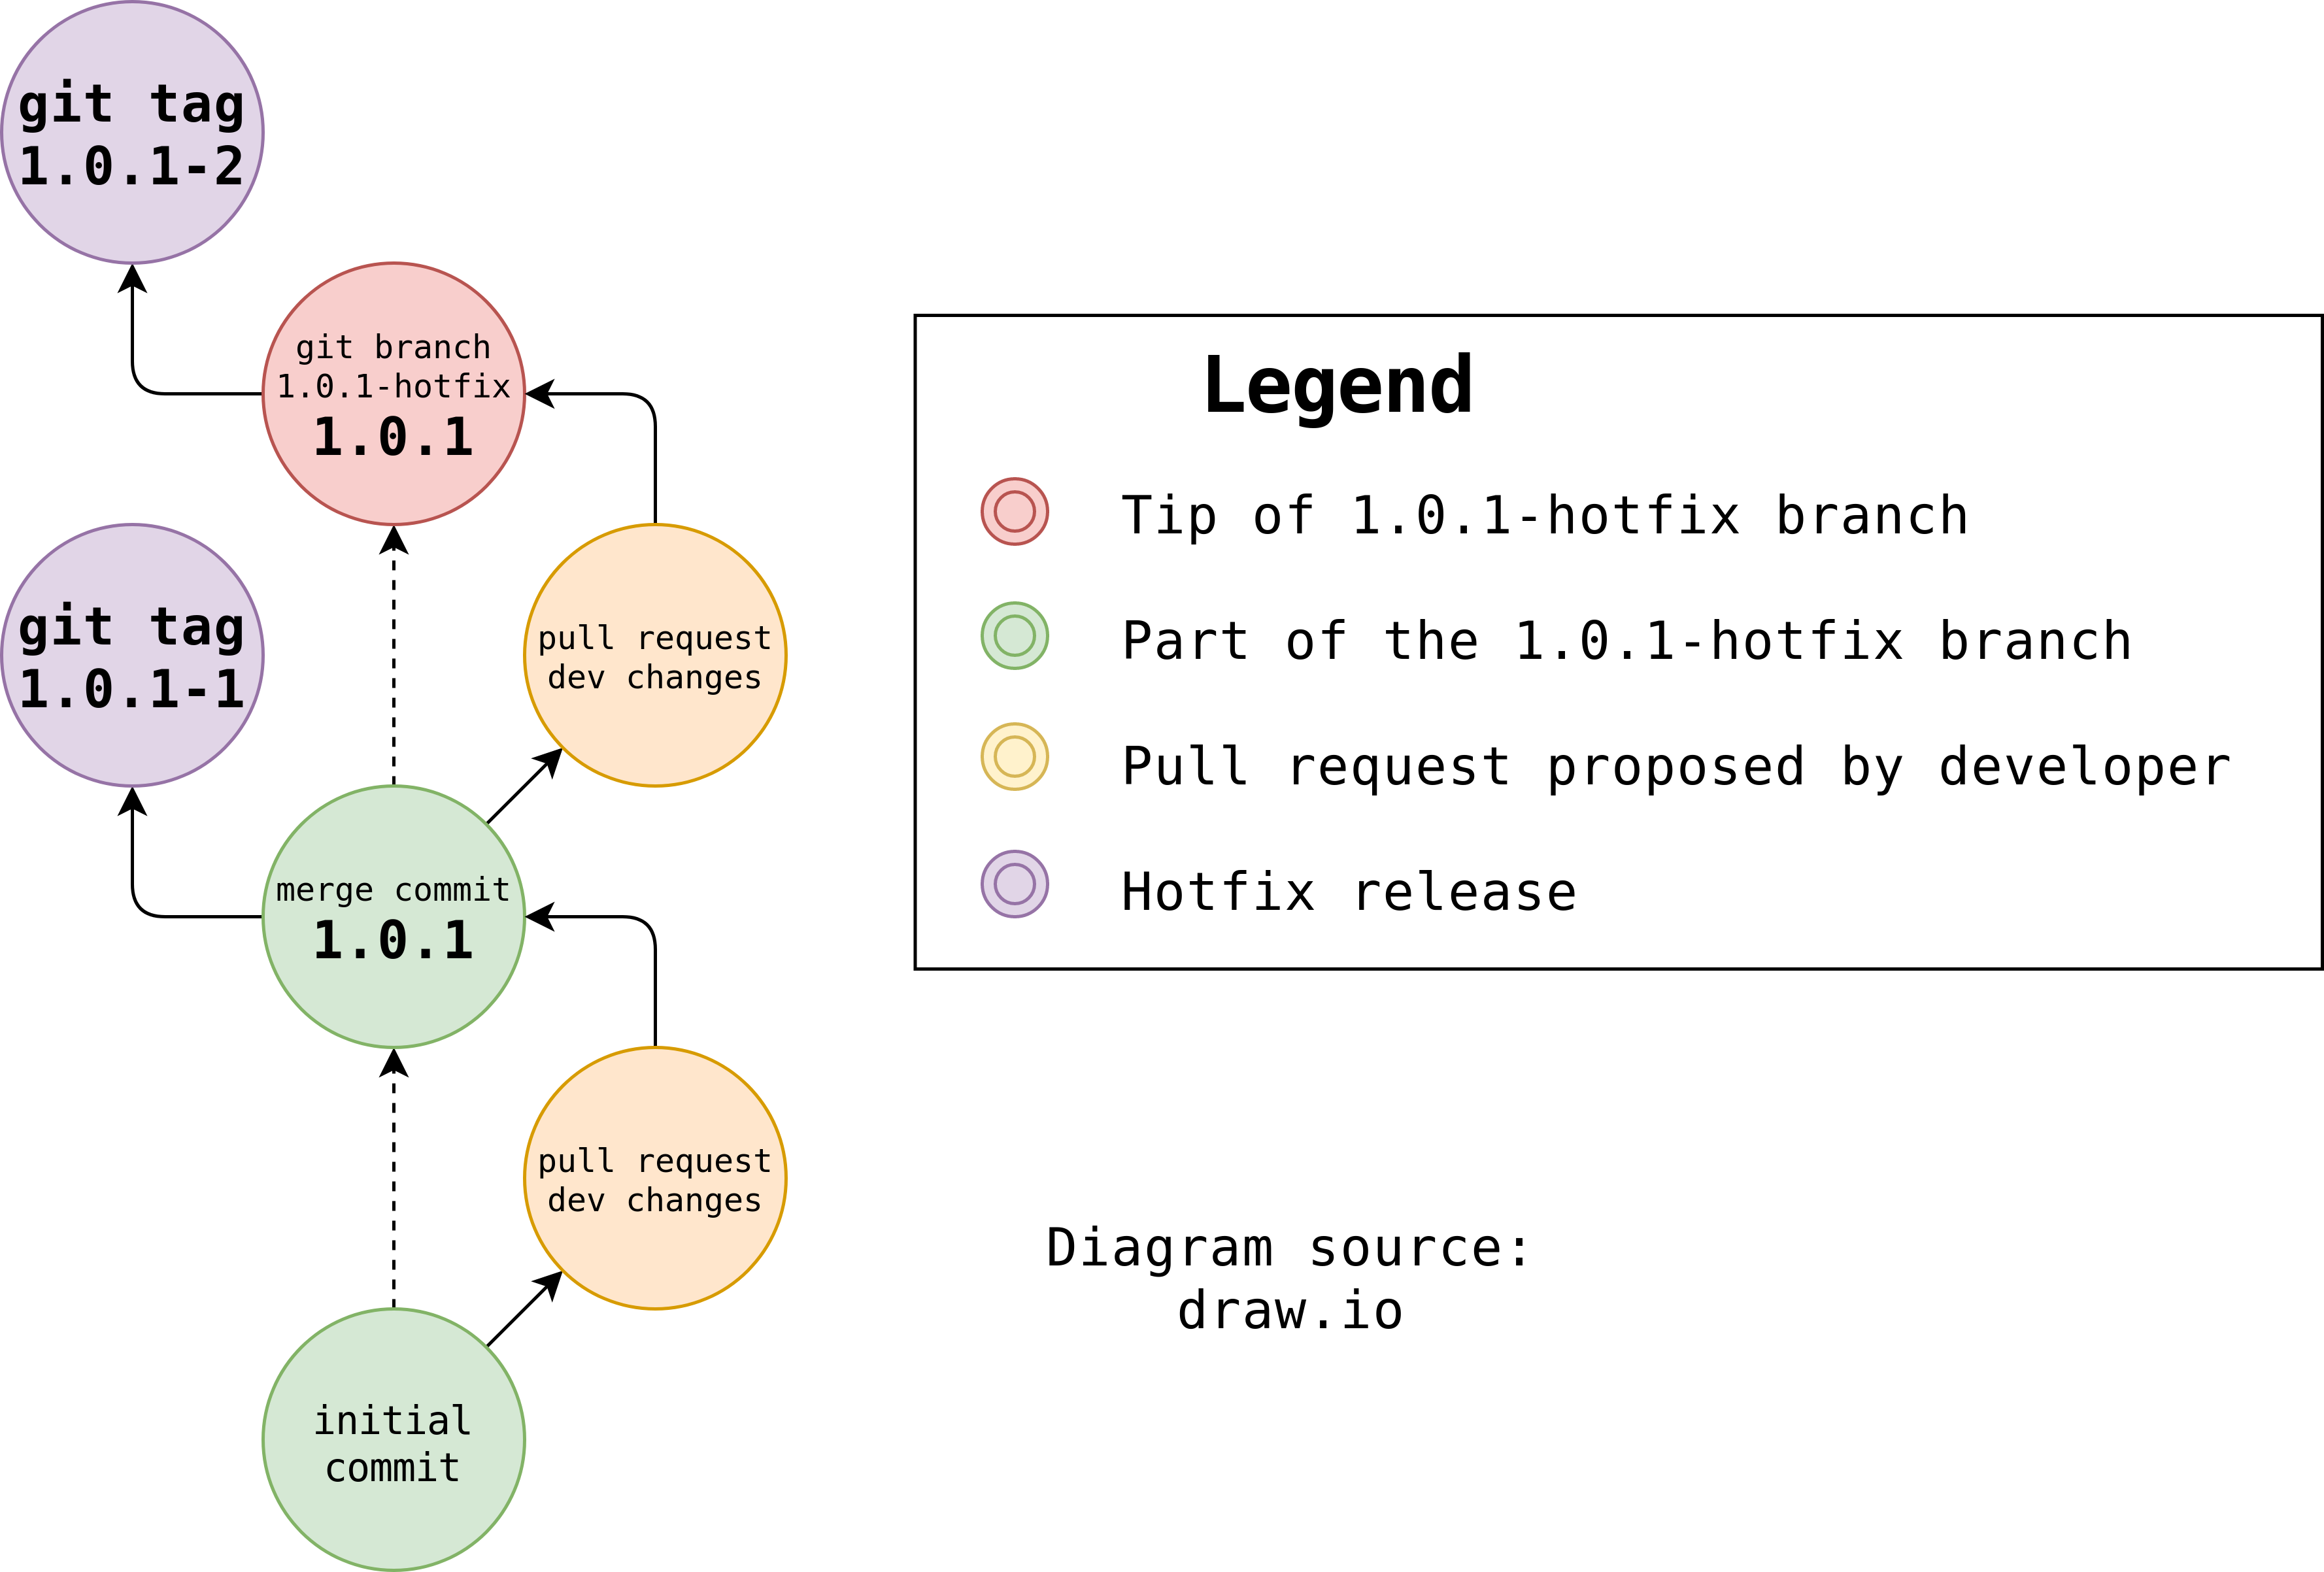 Diagram depicts the same workflow as master branch but on the hotfix branch, instead